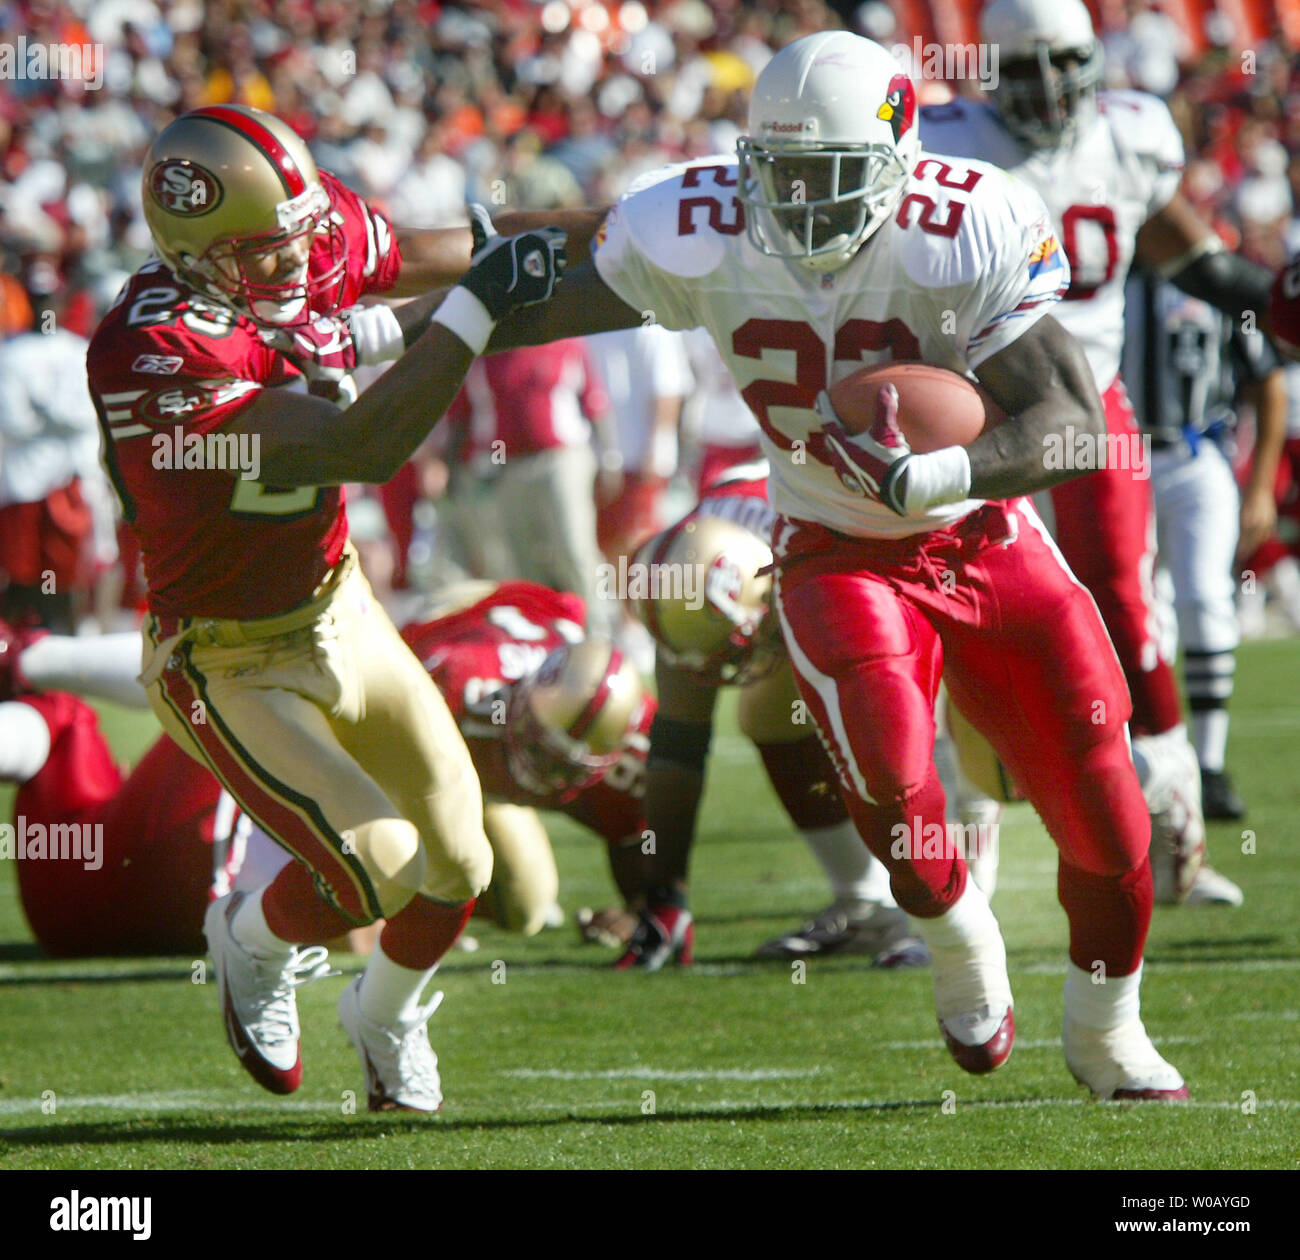 Phoenix Cardinals Emmitt Smith (22) puts a straight arm on San Francisco 49ers Ahmed Plummer (29) enroute to a TD at Monster Park in San Francisco on October 10, 2004.    (UPI Photo/Bruce Gordon) Stock Photo